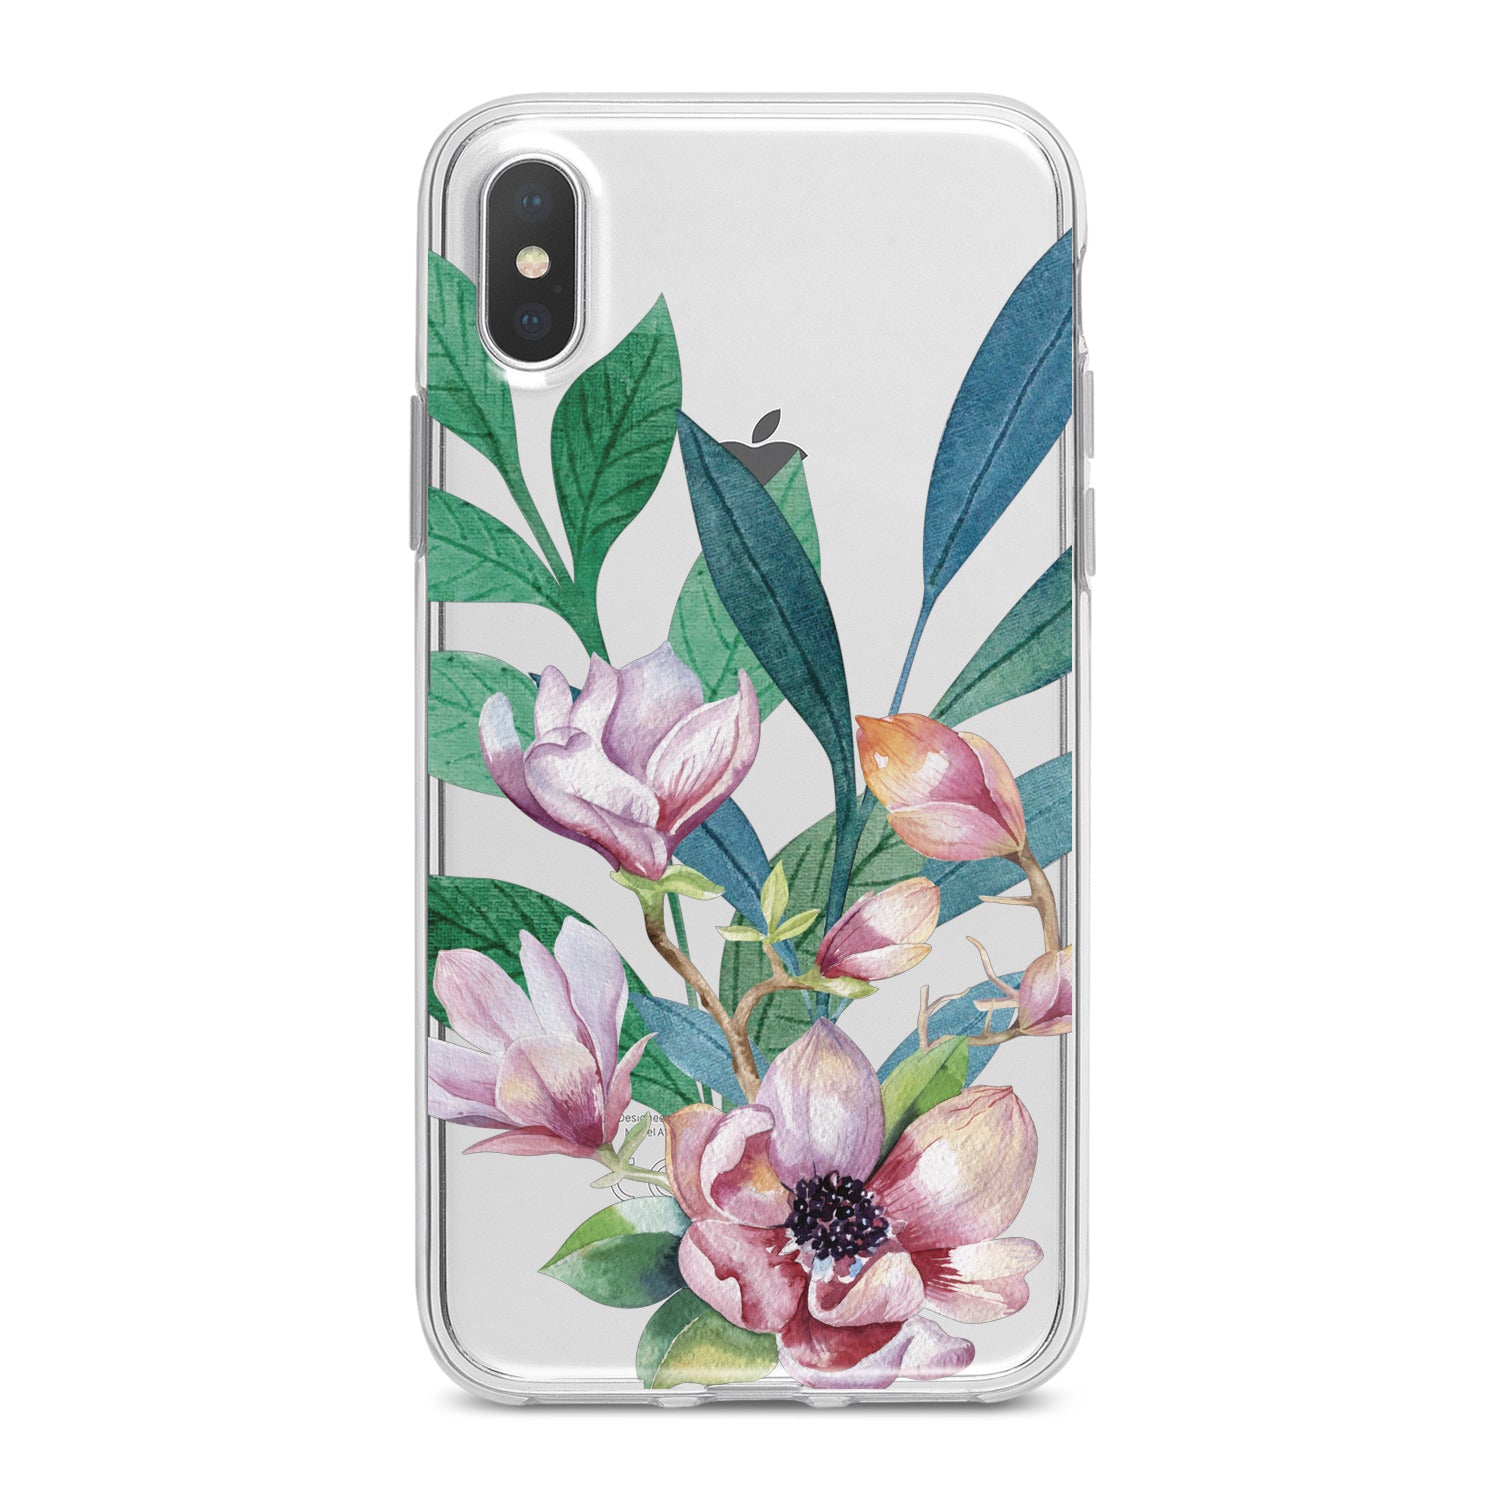 Lex Altern Lilac Magnolia Phone Case for your iPhone & Android phone.